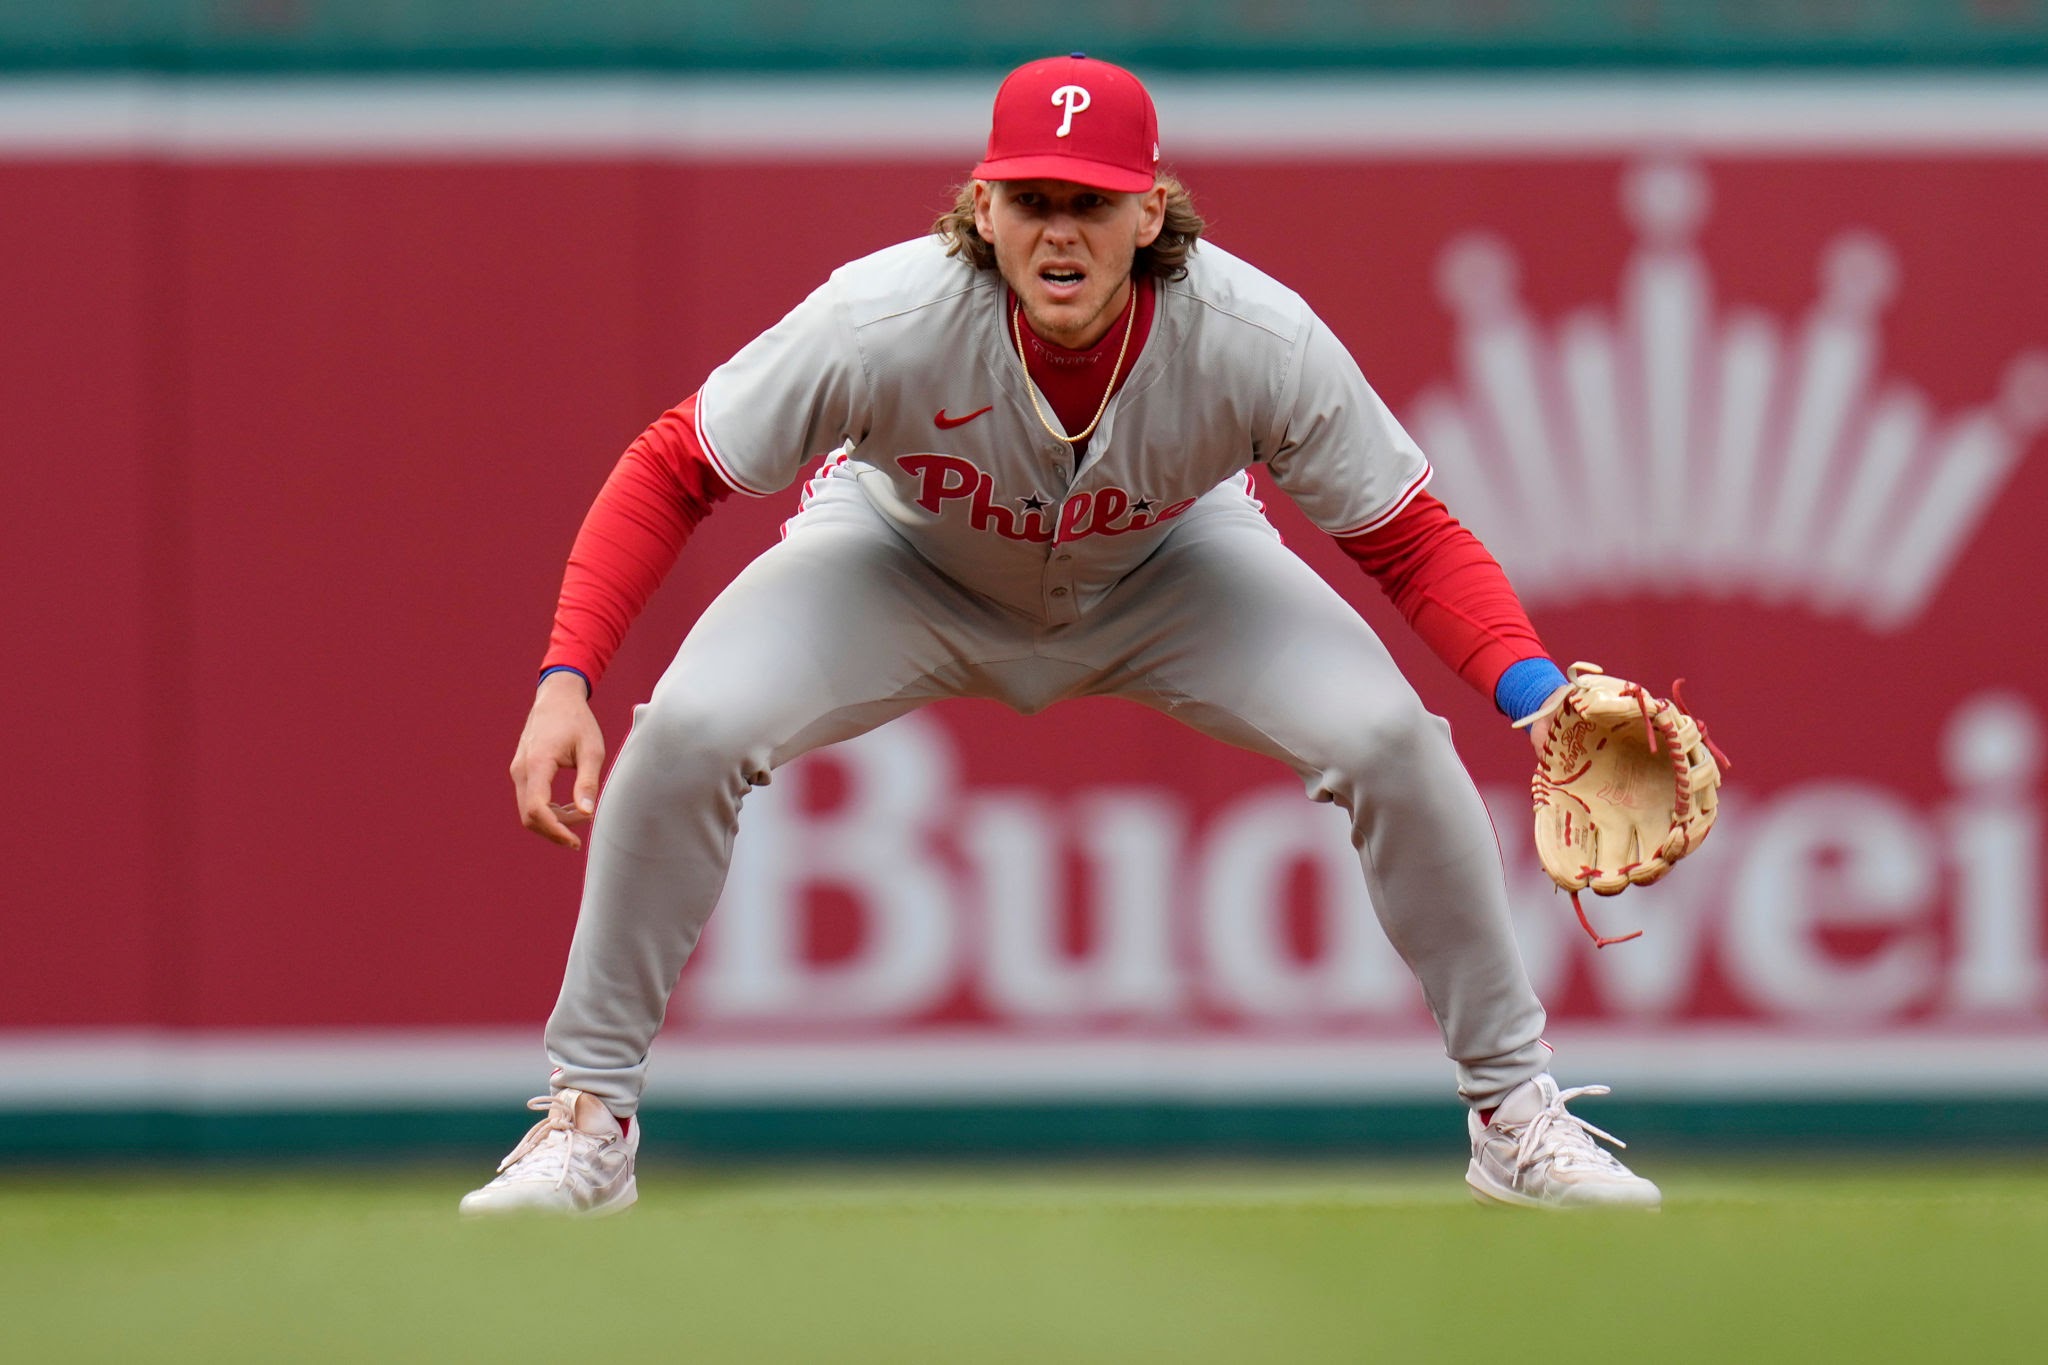 Breaking News: Phillies Alec Bohm Agree to a Contract Extension…